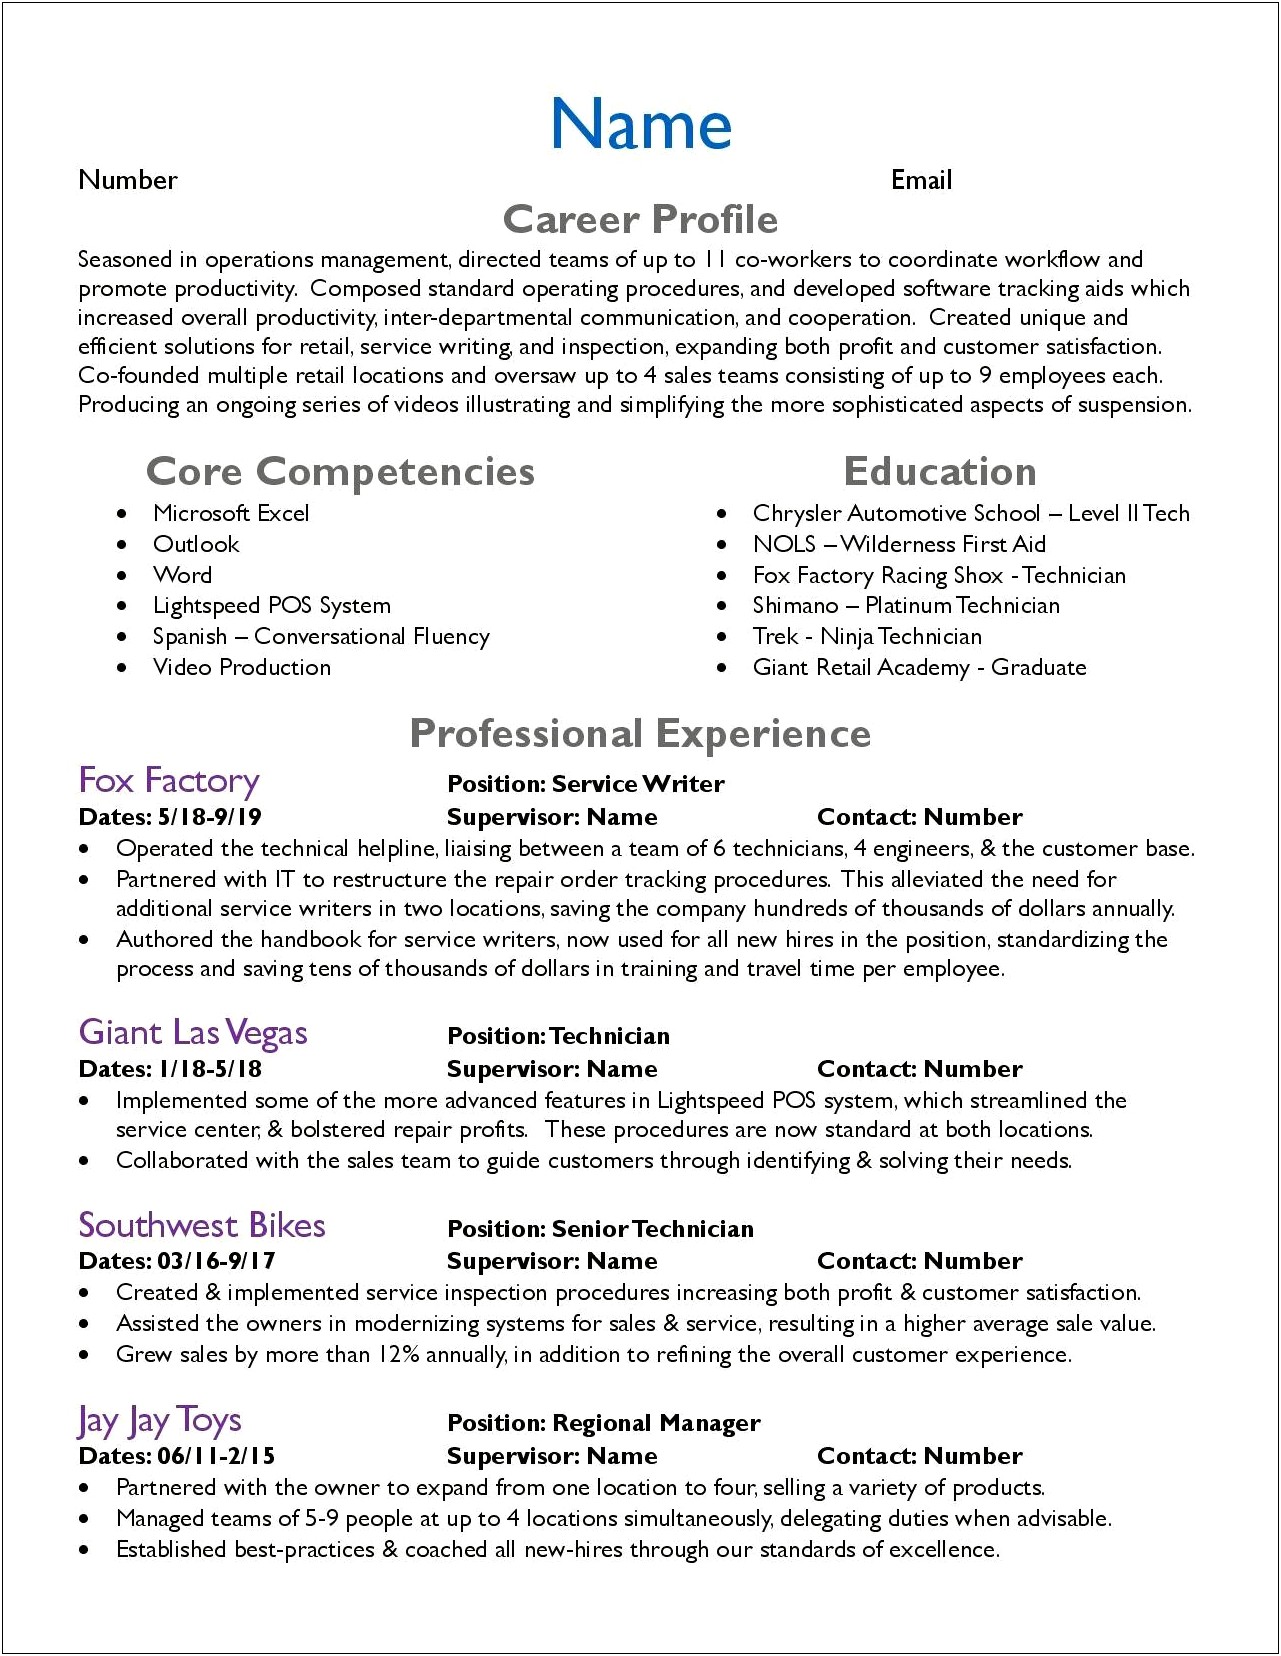 Resume For School Operations Manager